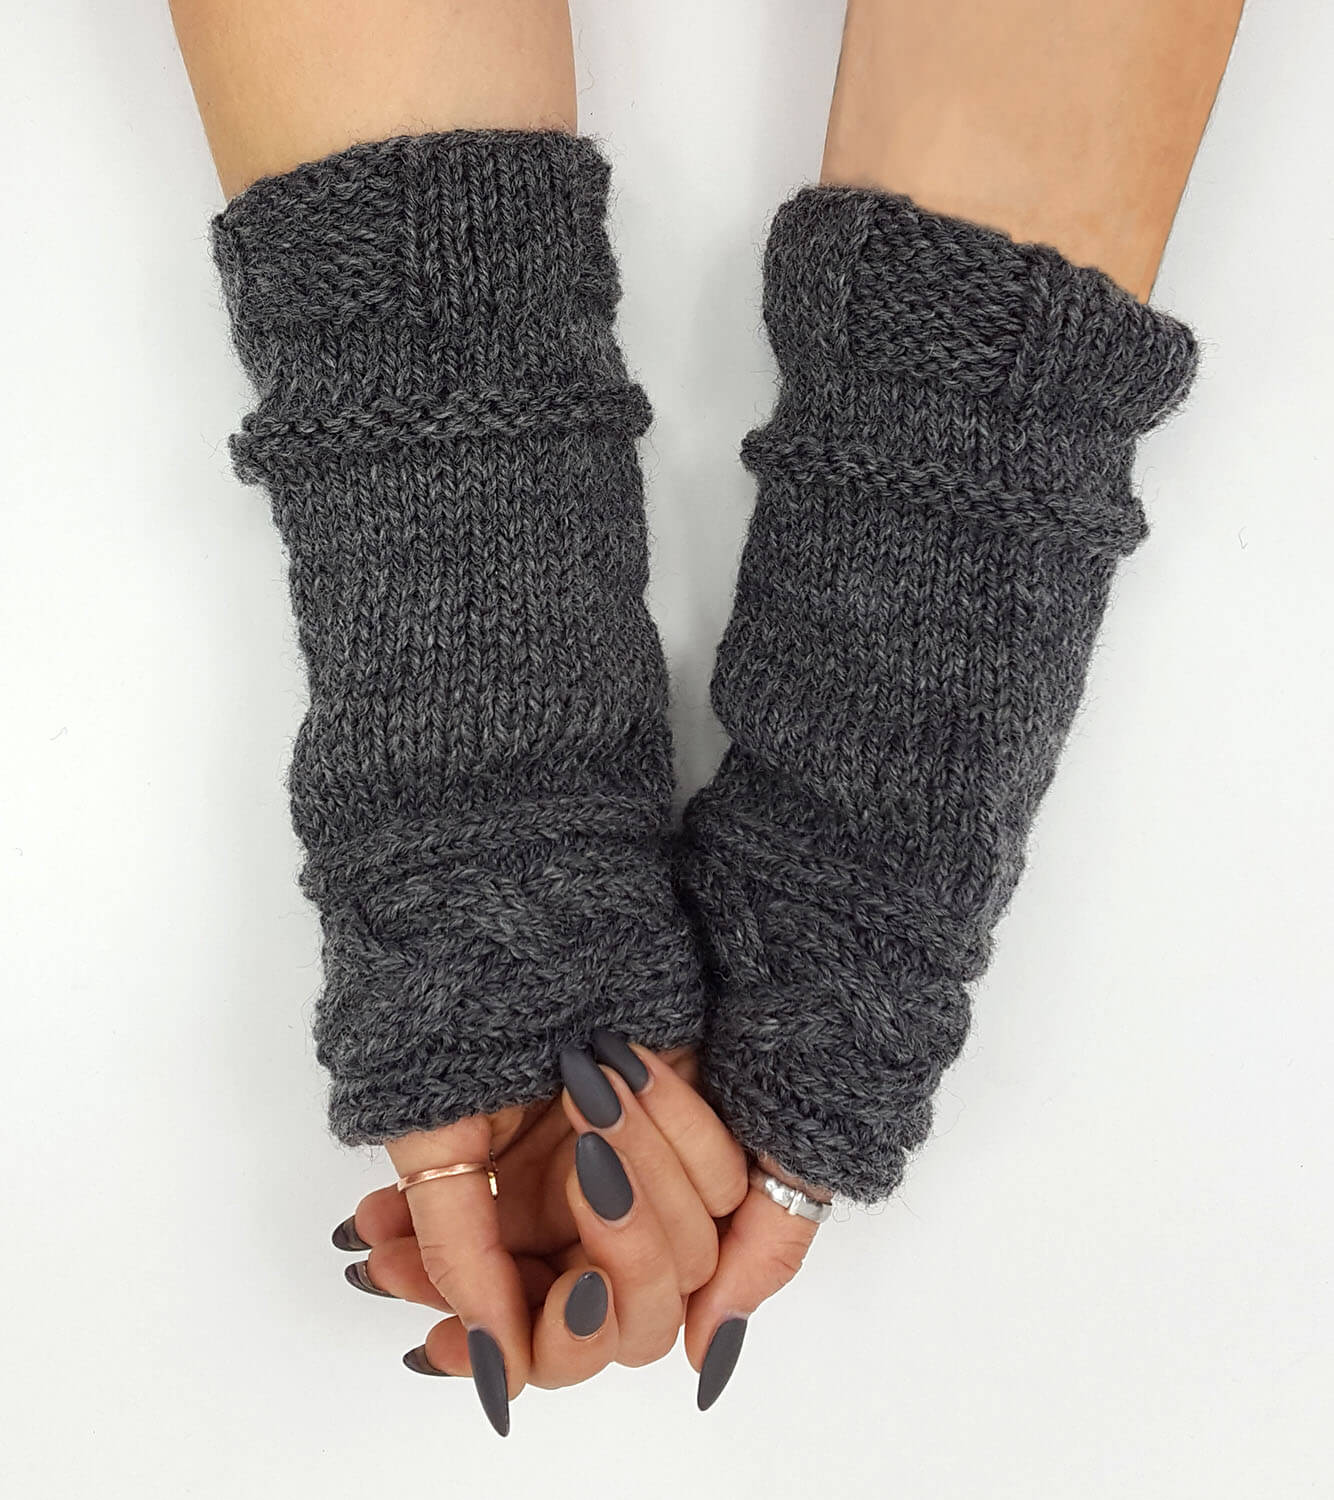 These 100% wool wrist warmers are lovingly hand-knit in the USA. Inspired by the arm cuffs that Claire wears in OUTLANDER: The series. Wear it for your love of OUTLANDER or just for warmth and style. Measures approximately 4.5" x 9"